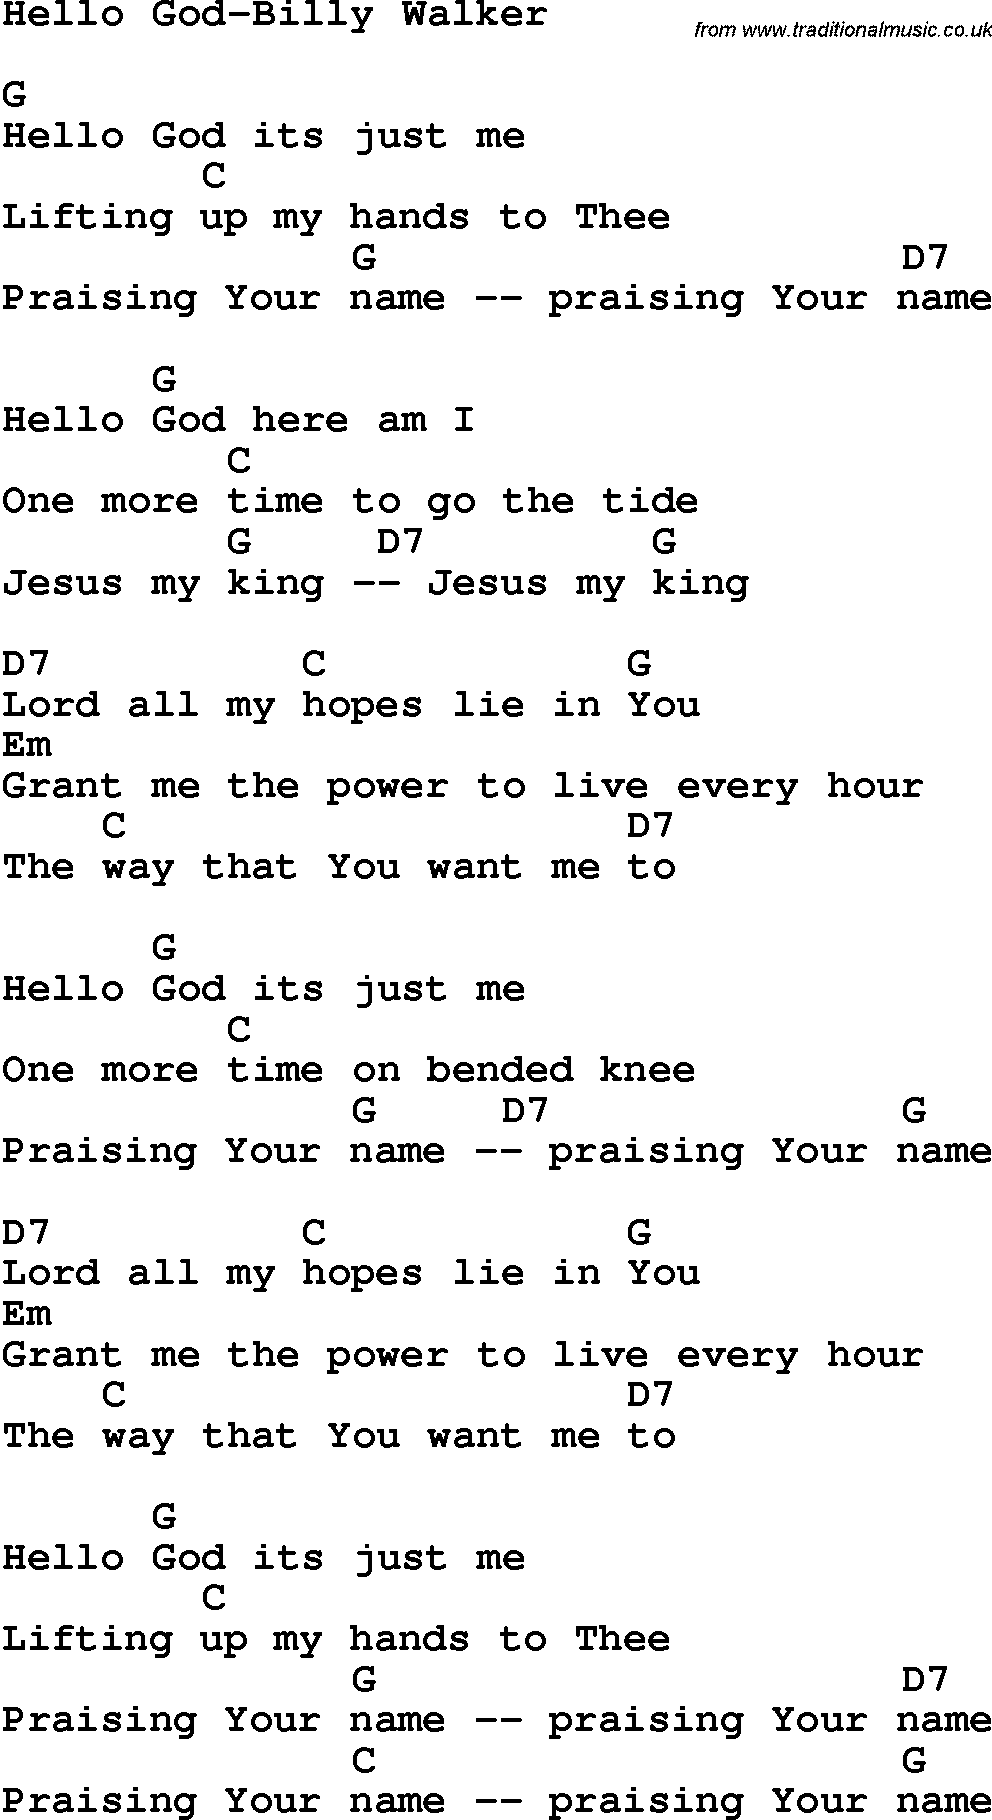 Country, Southern and Bluegrass Gospel Song Hello God-Billy Walker lyrics and chords